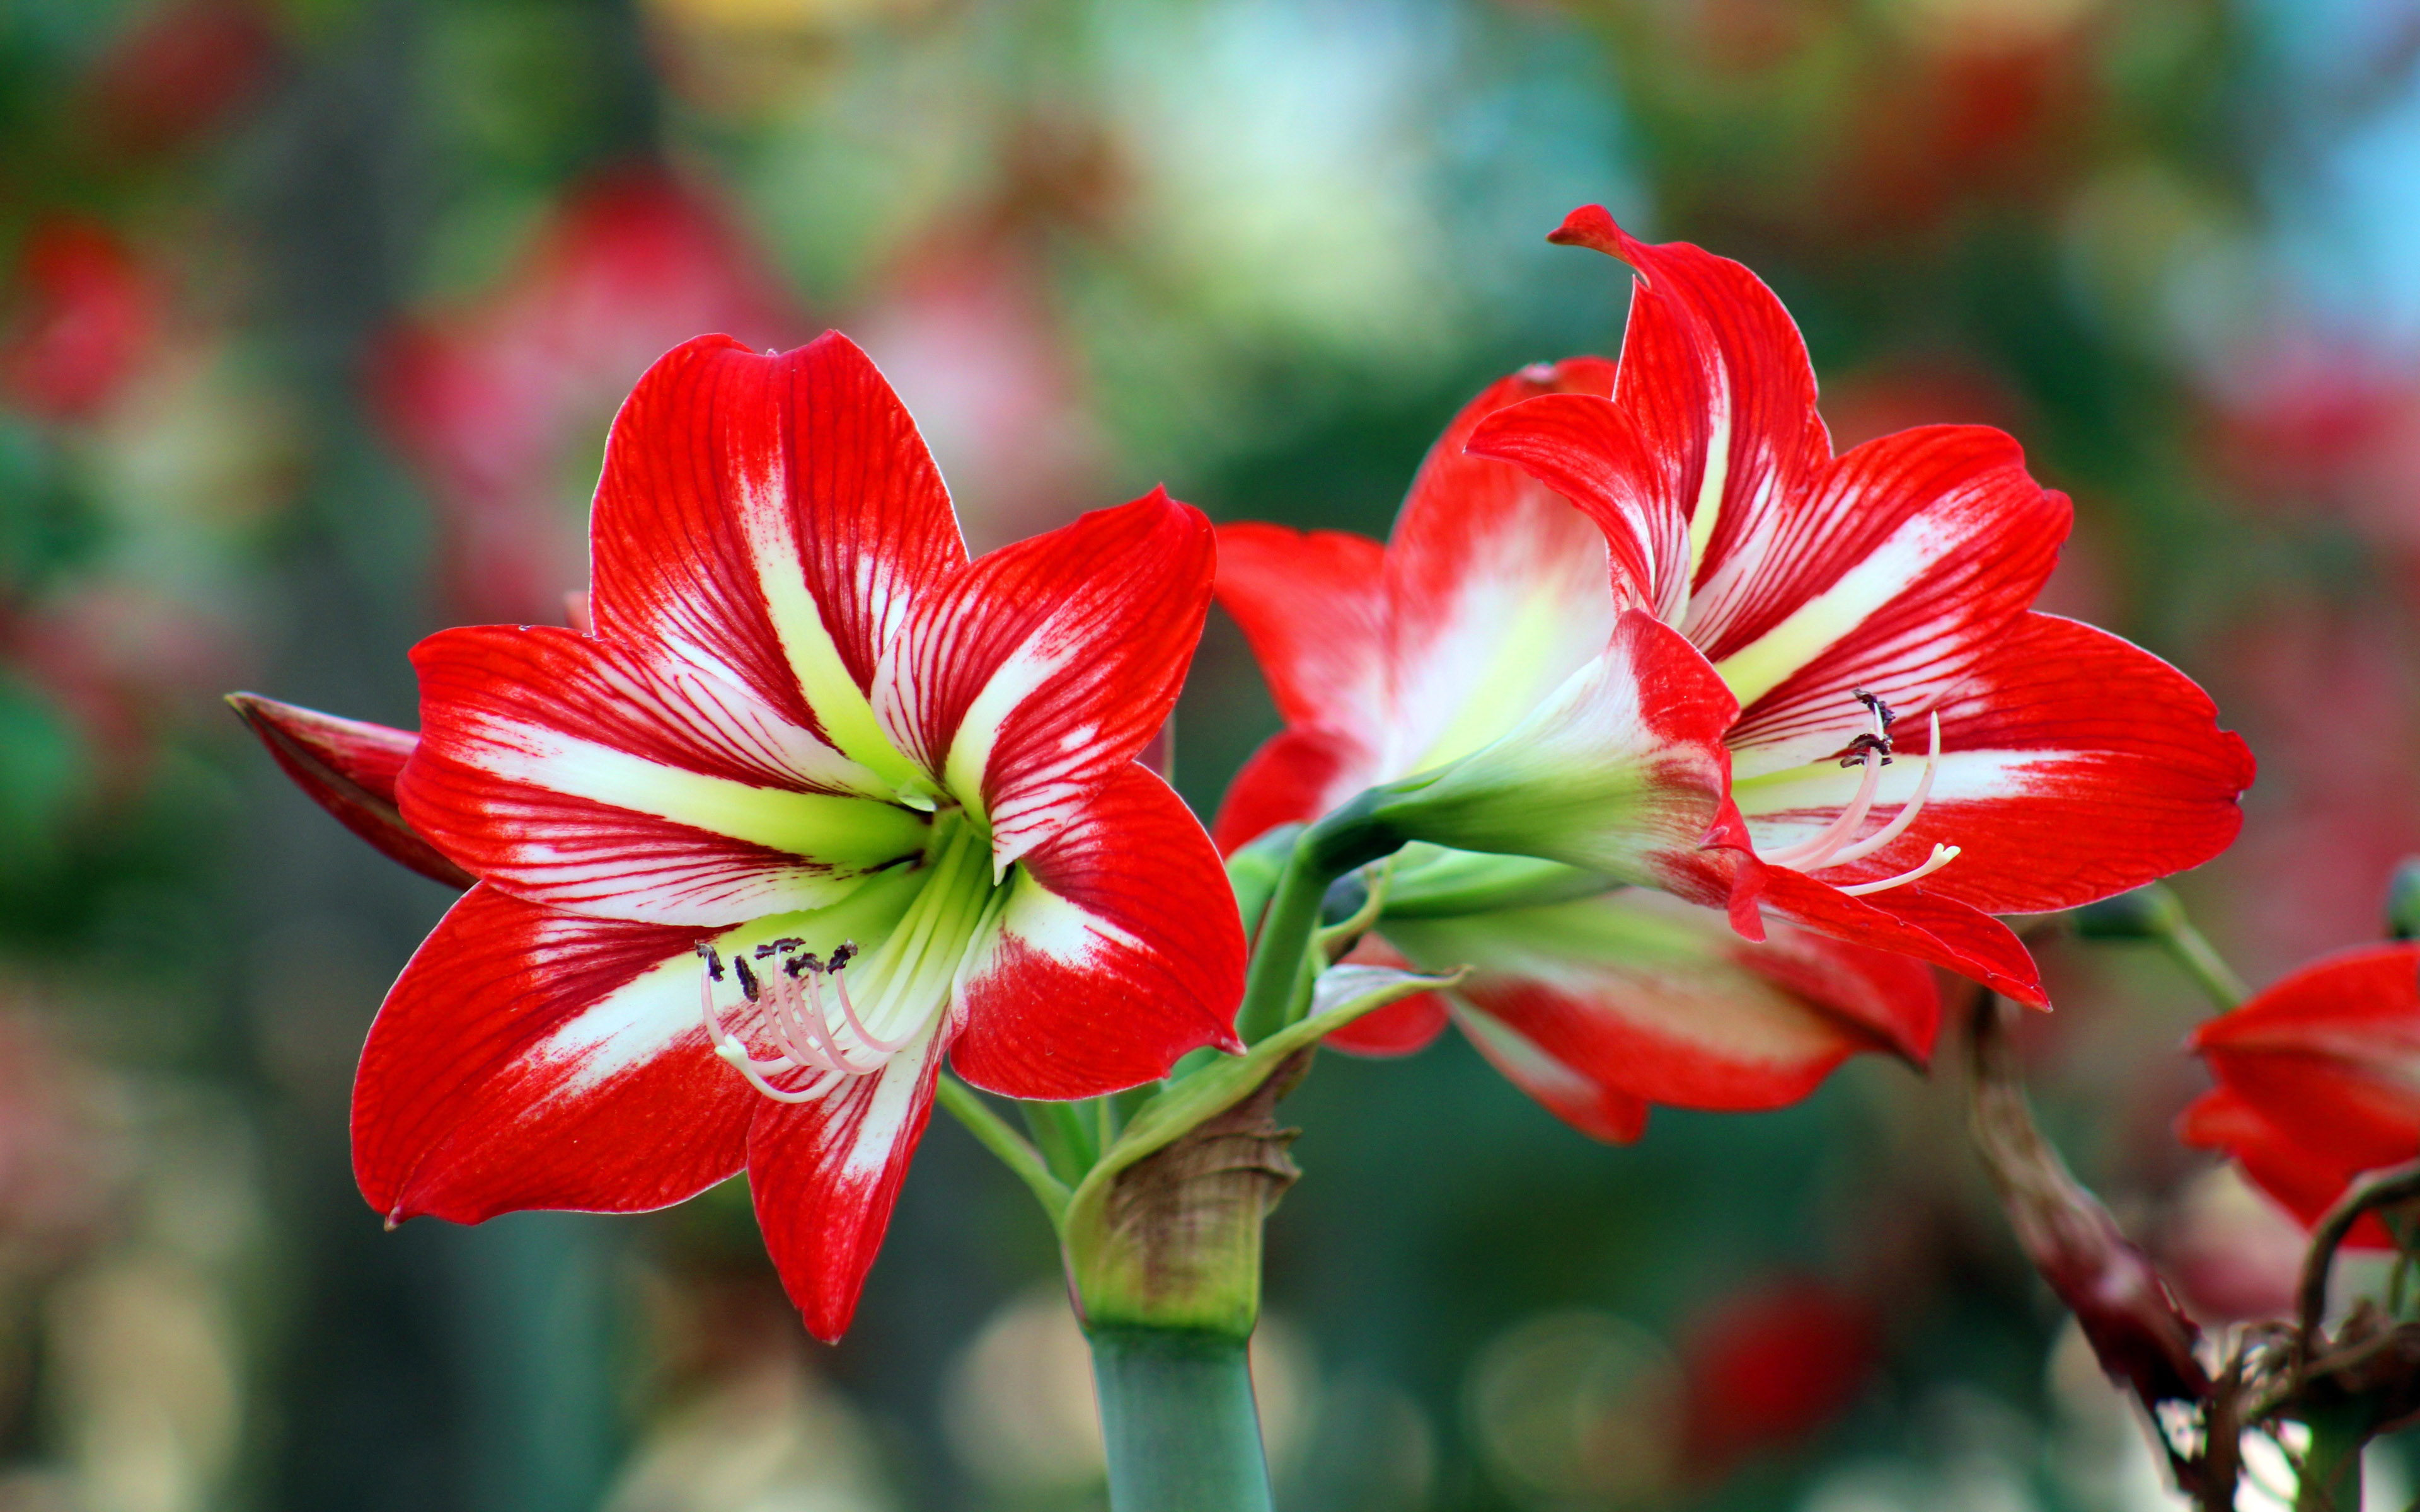 Lily Red Flowers With White Oriental Pipe Hybrid Lily Ornamental Plants 3840x2400 : Wallpapers13.com